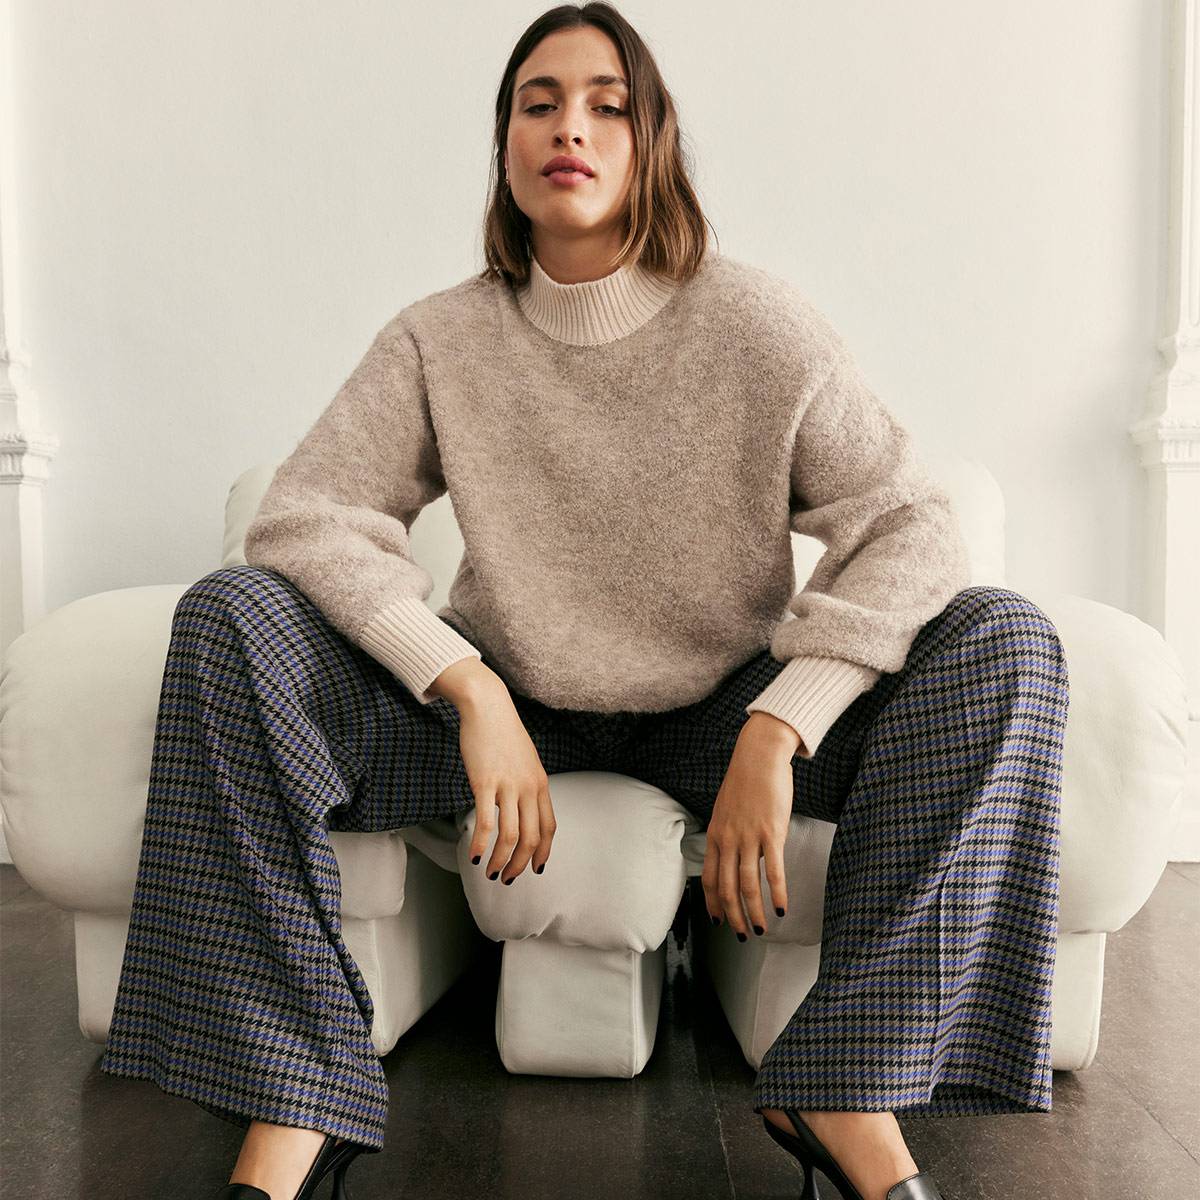 Woman wearing beige knit and checked pants